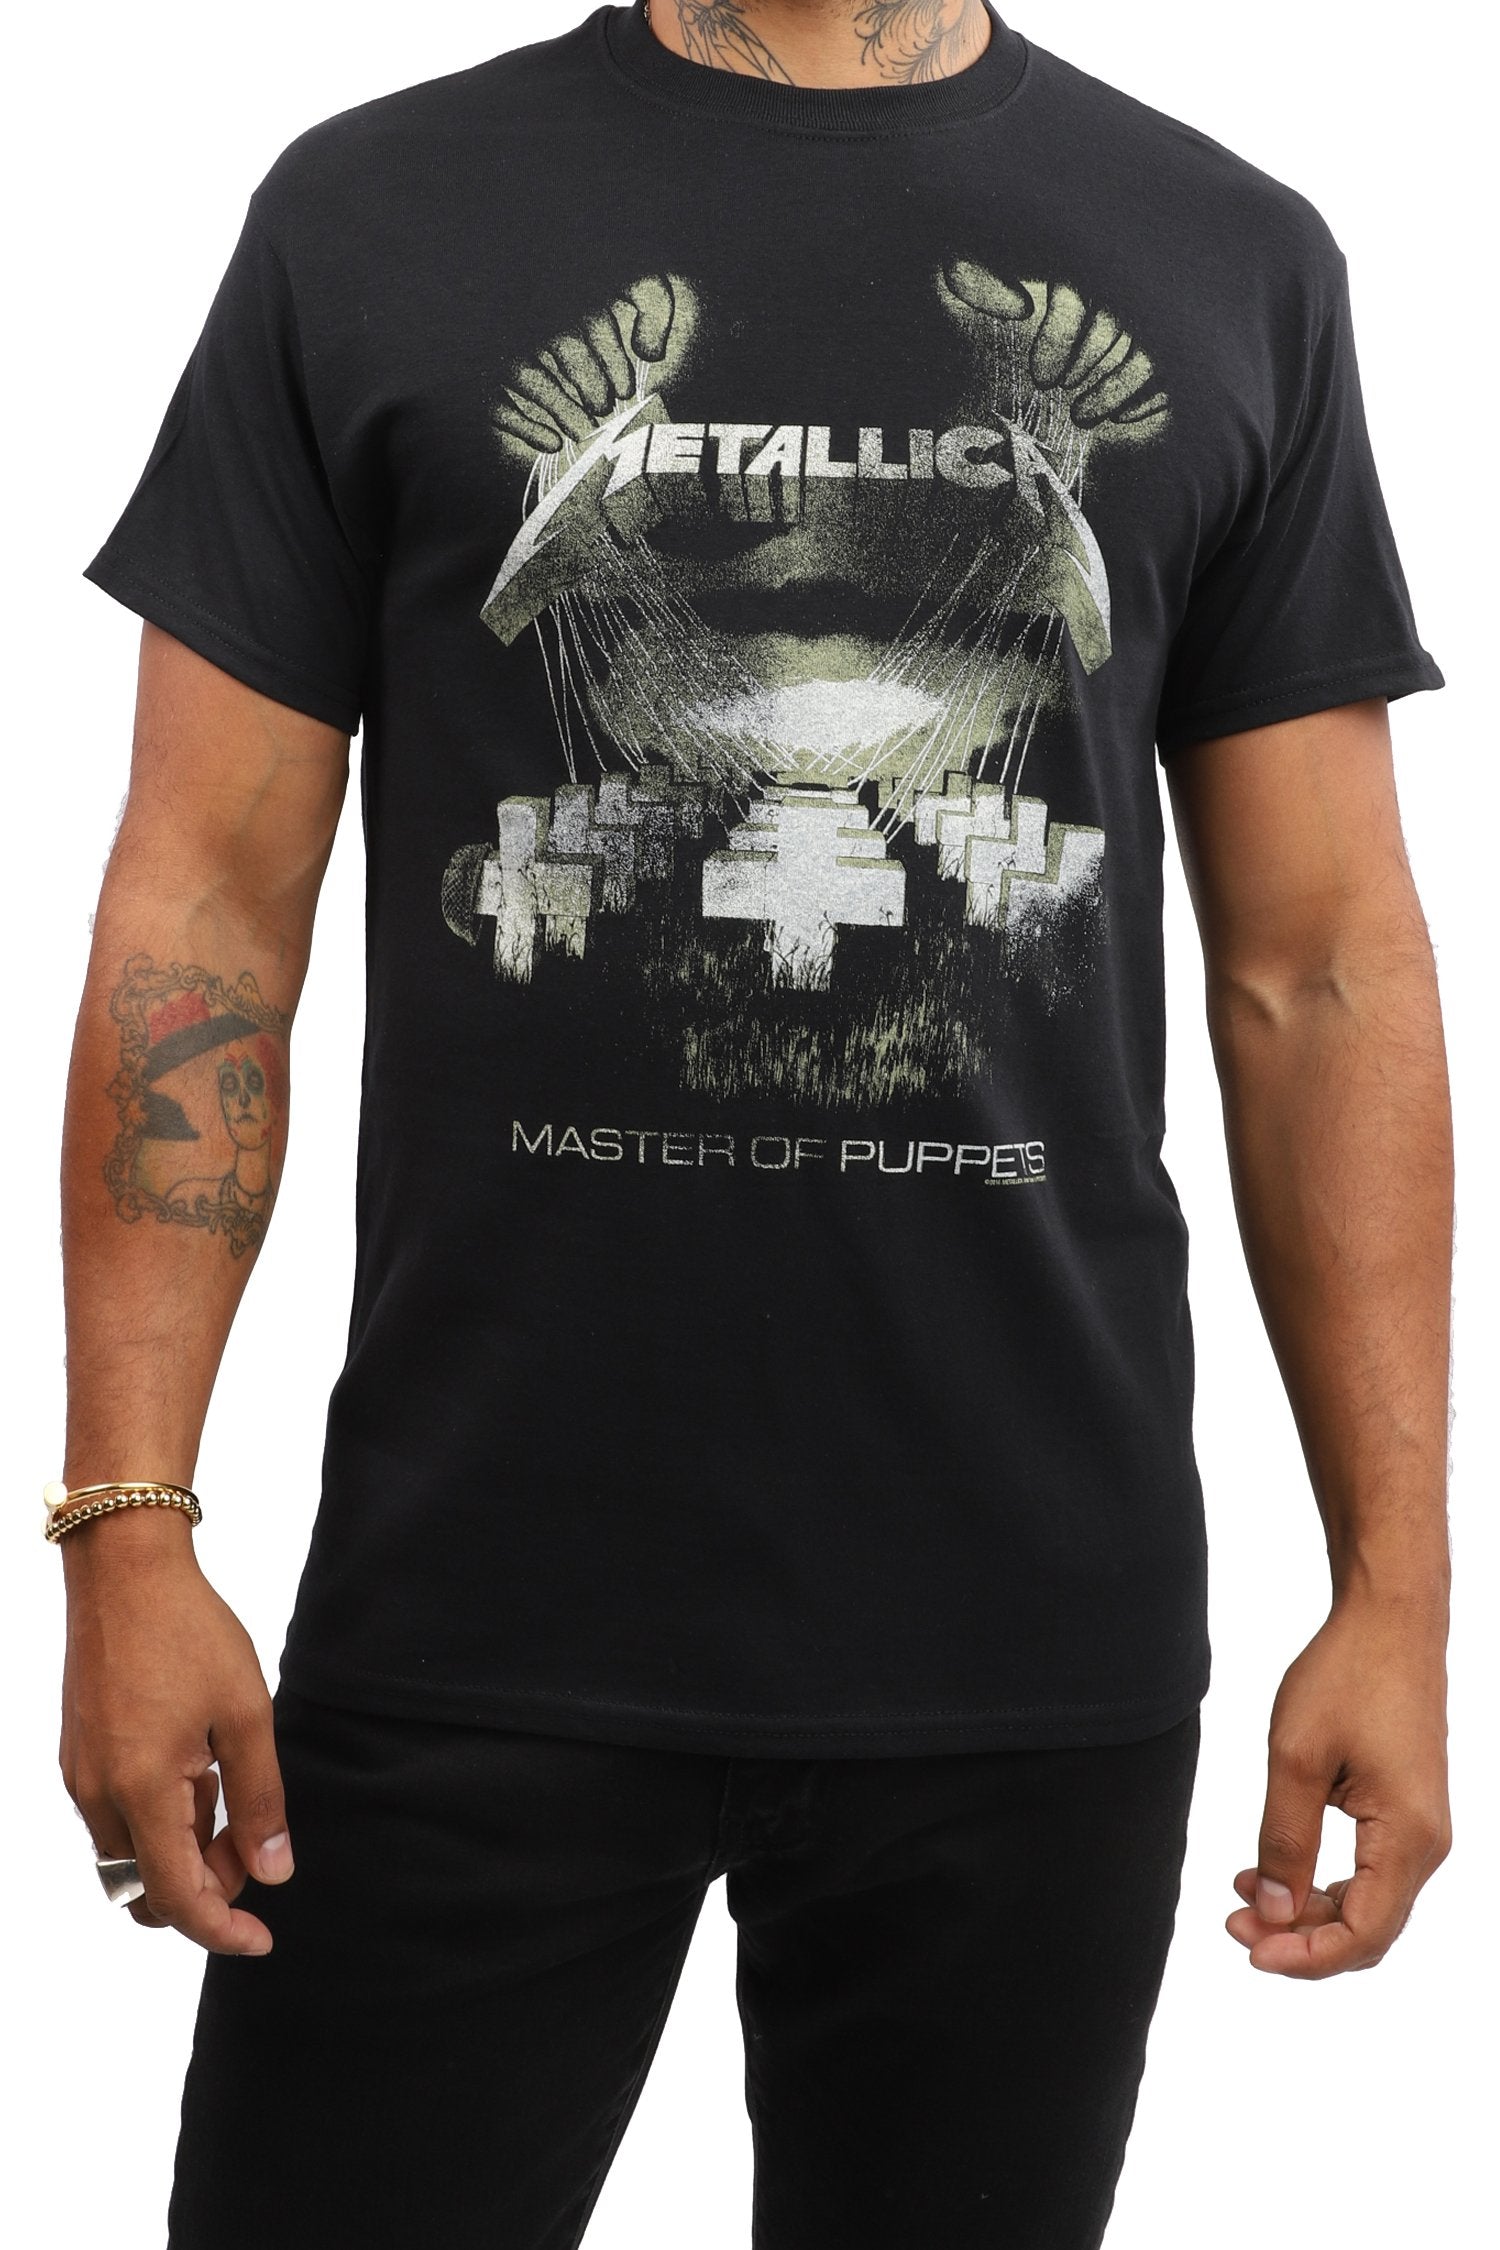 Metallica T Shirt - Masters Of Puppets Amplified Vintage